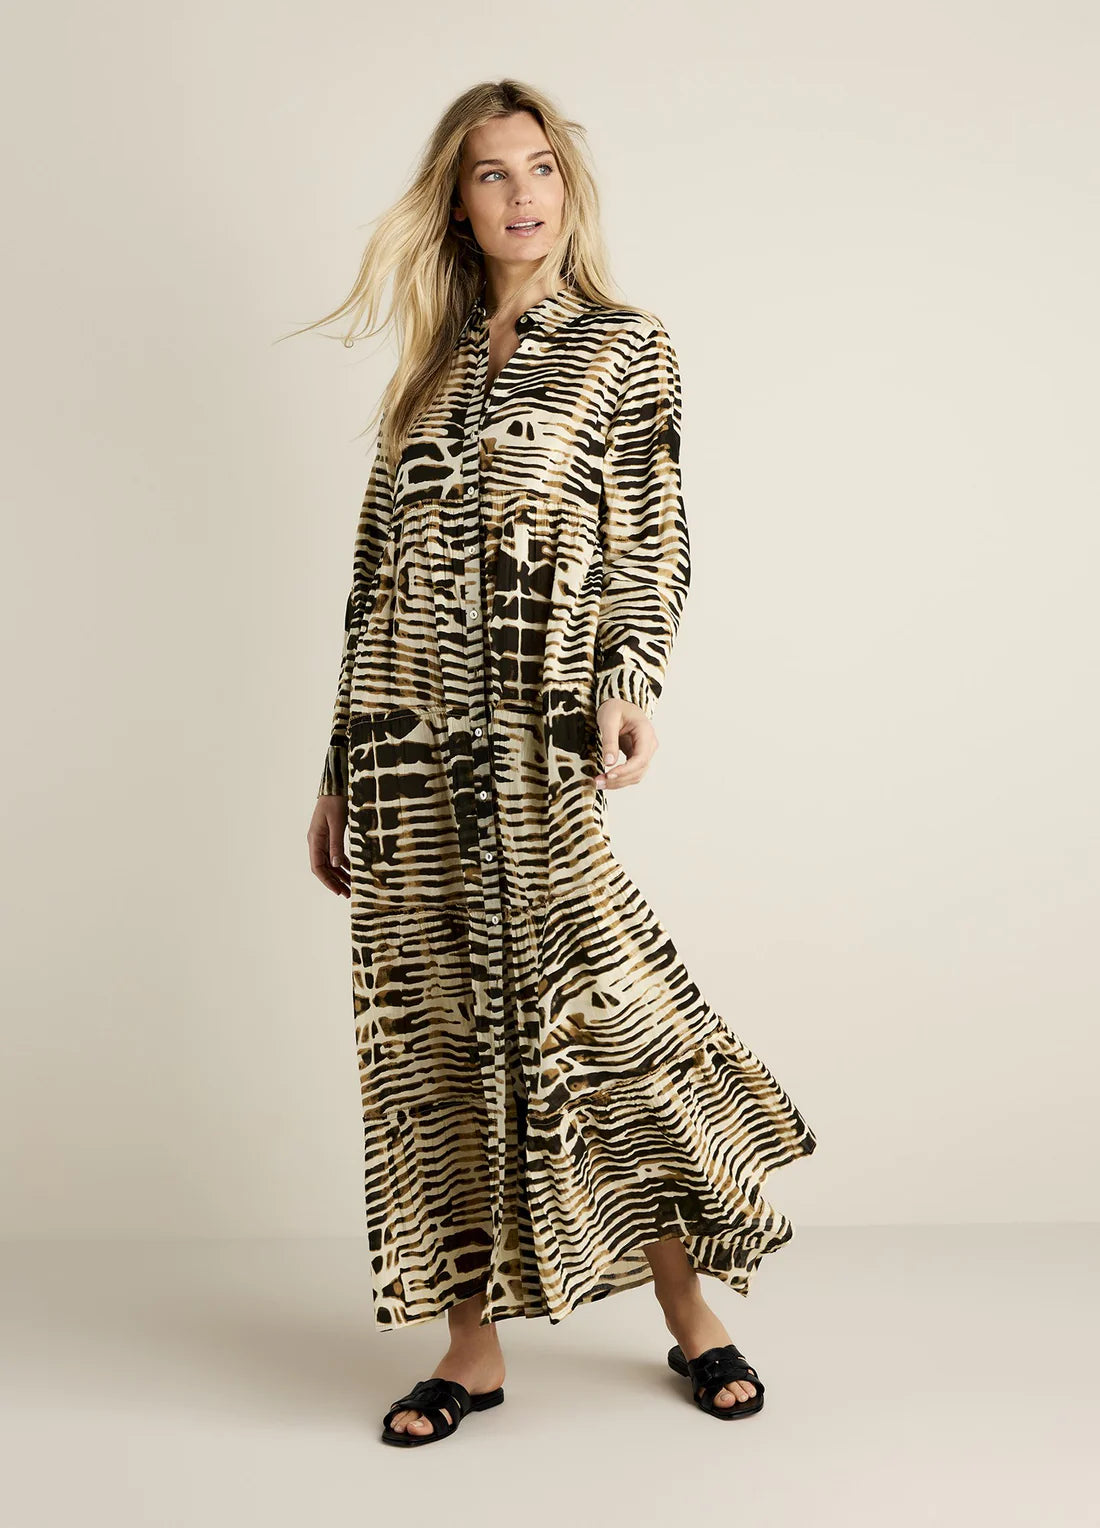 Button-Down Dress by Summum in Animal Print